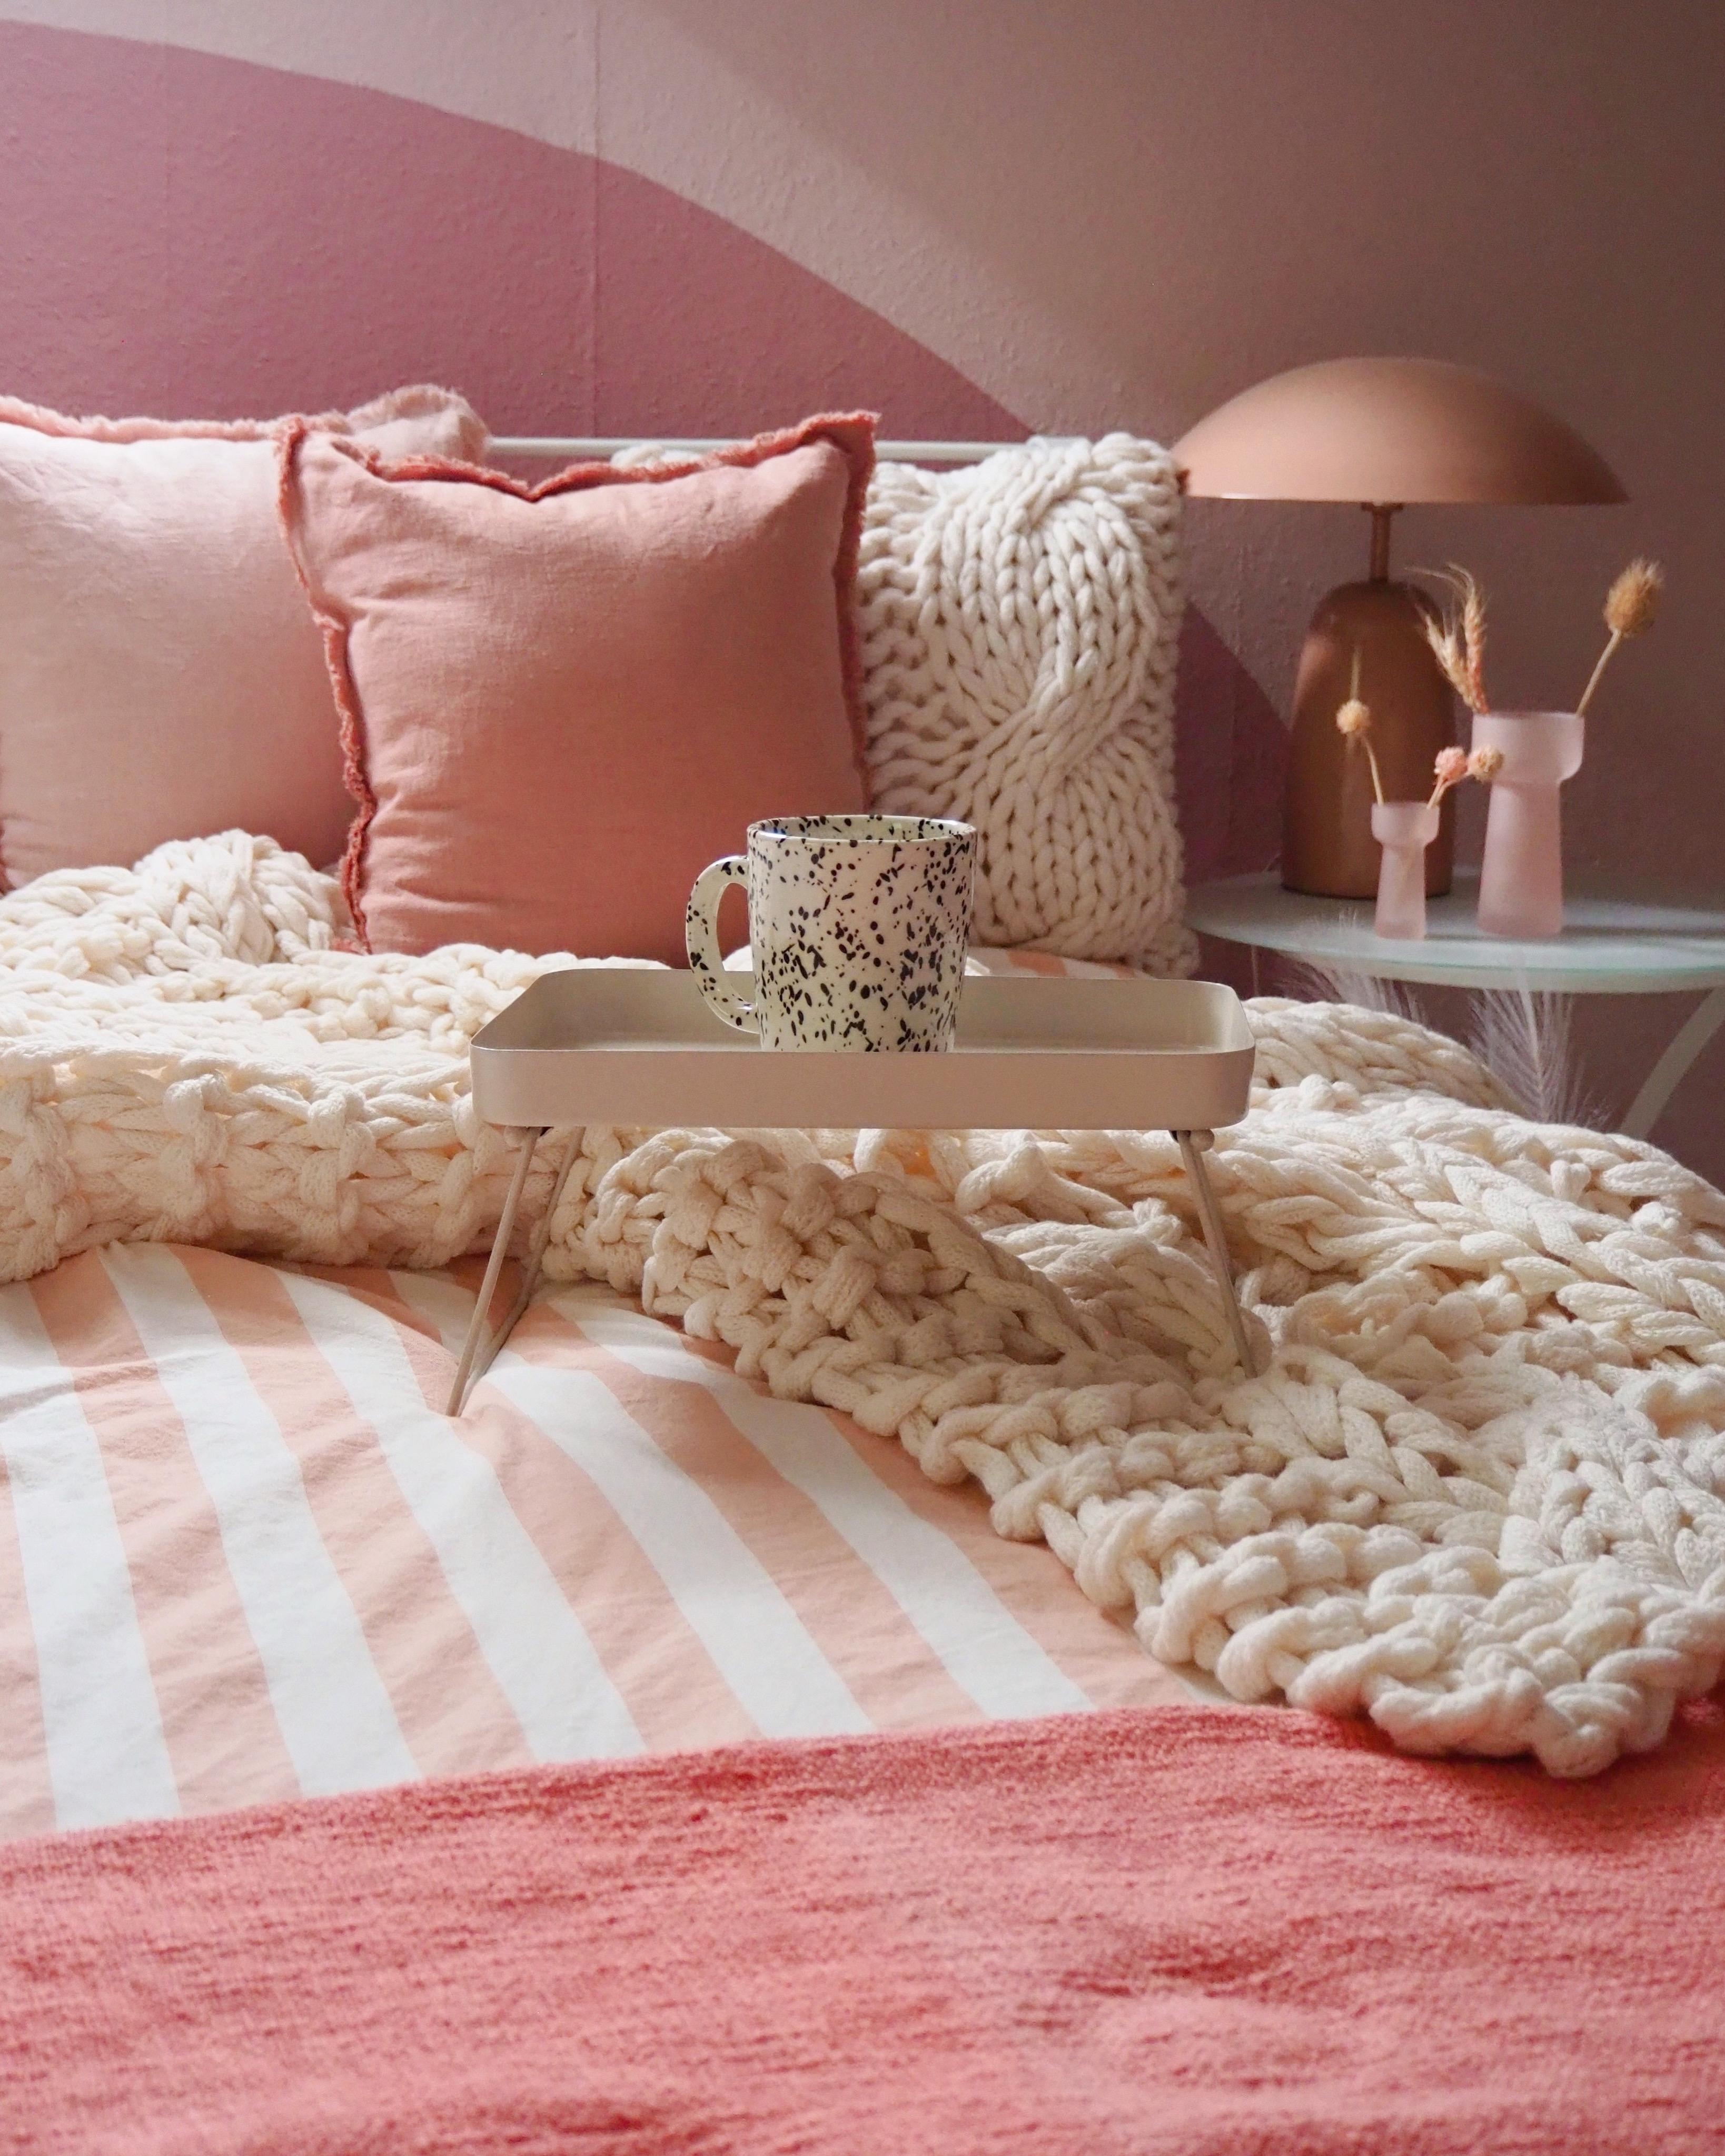 COZY WEEKEND #bedstyle #schlafzimmer #colourfulhome #pink #cozyhome #cozyautumn #hyggehome